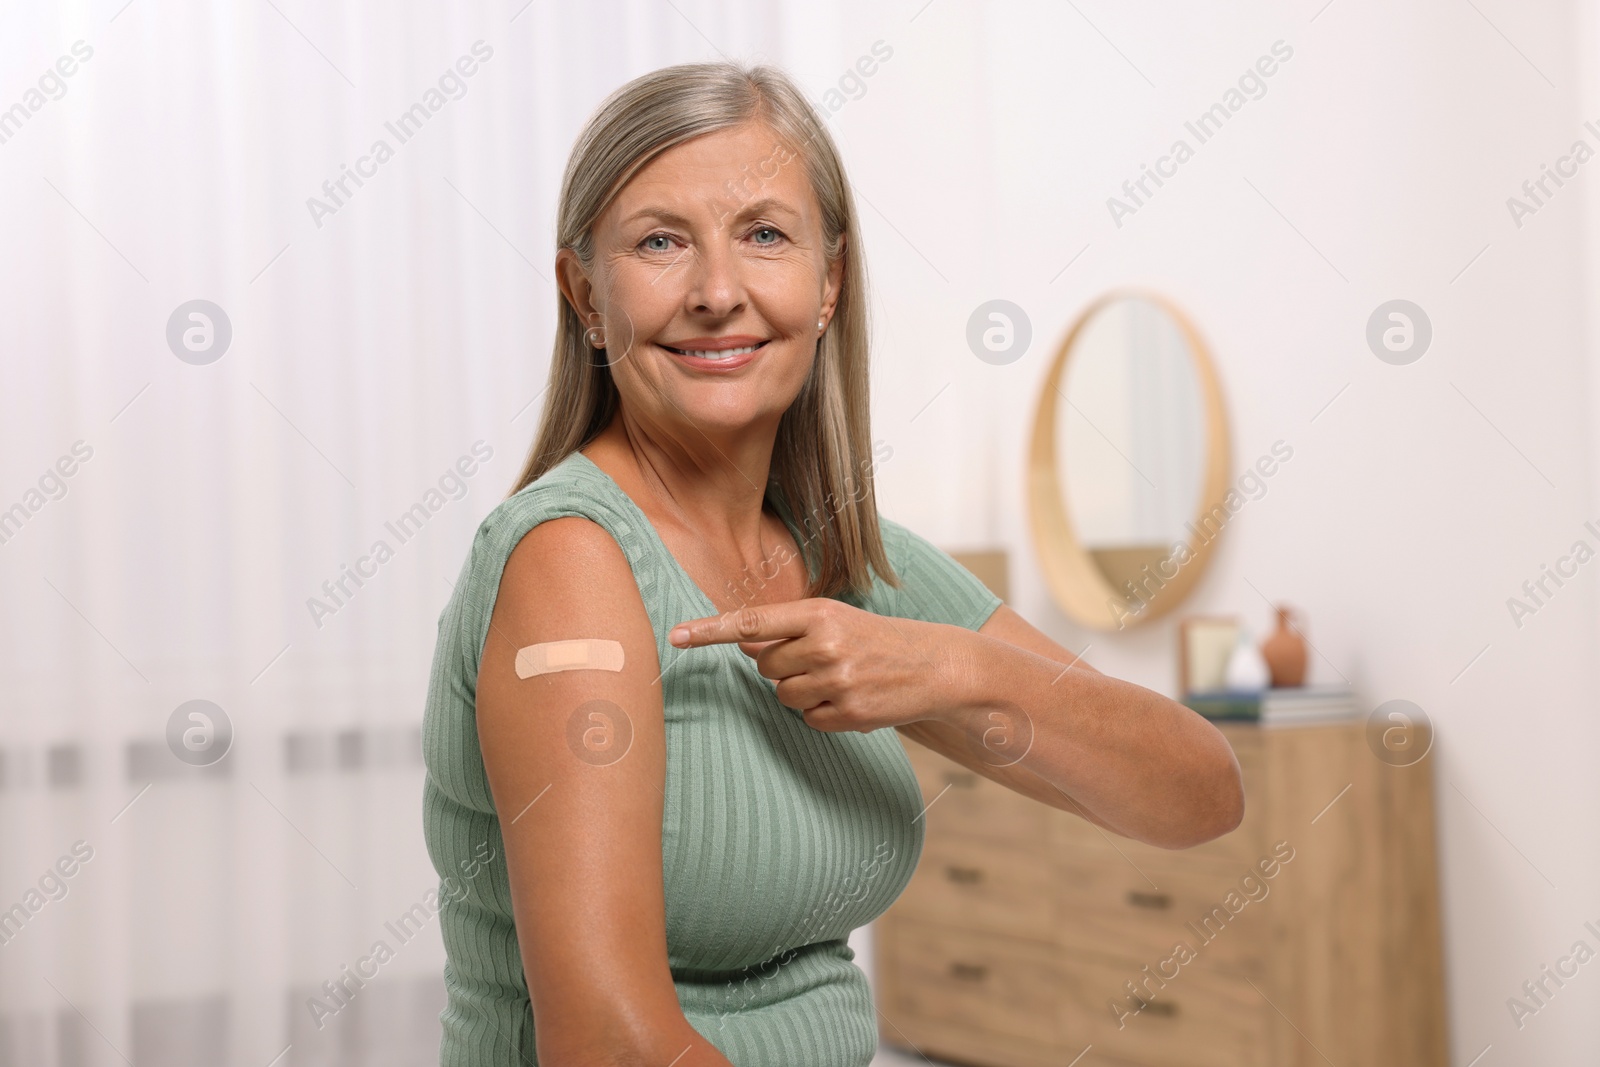 Photo of Senior woman pointing at adhesive bandage after vaccination in room